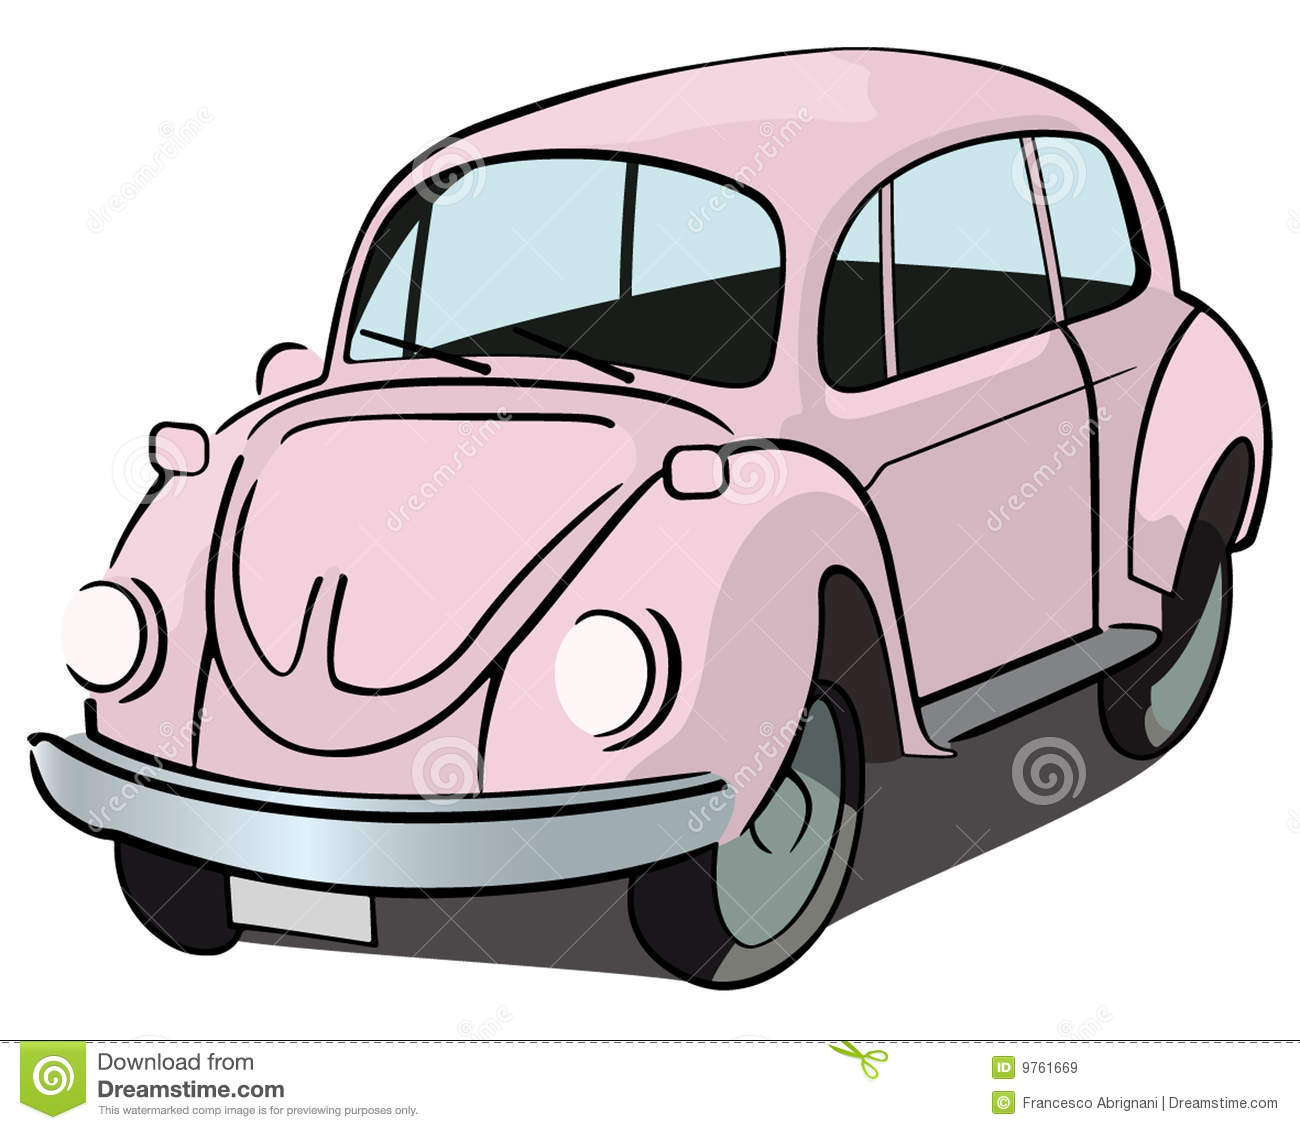 There Is 19 Pink Car Free Cliparts All Used For Free